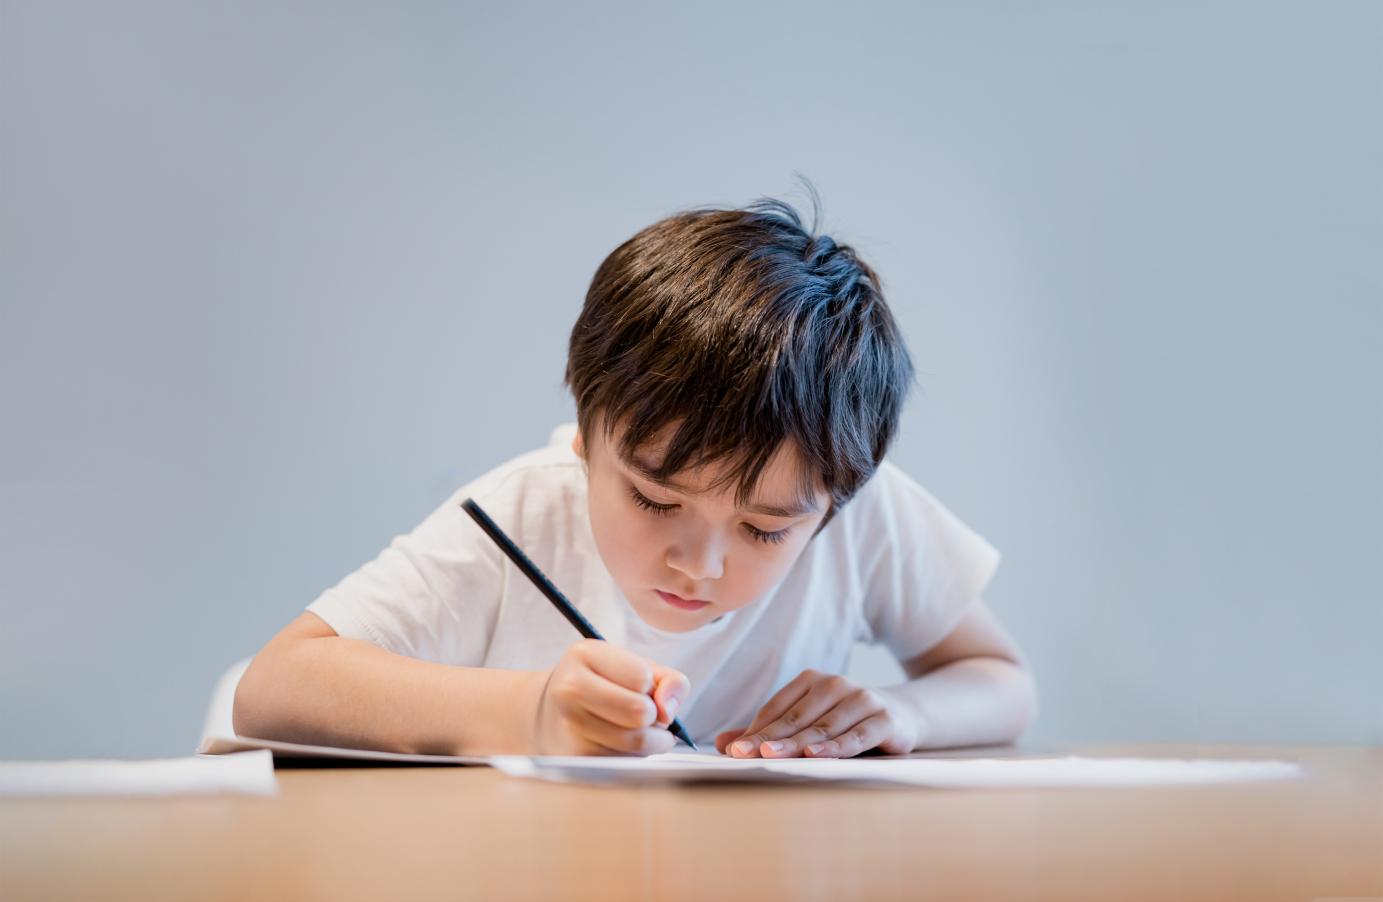 Young boy in a white t-shirt concentrating while writing on a piece of paper at a table